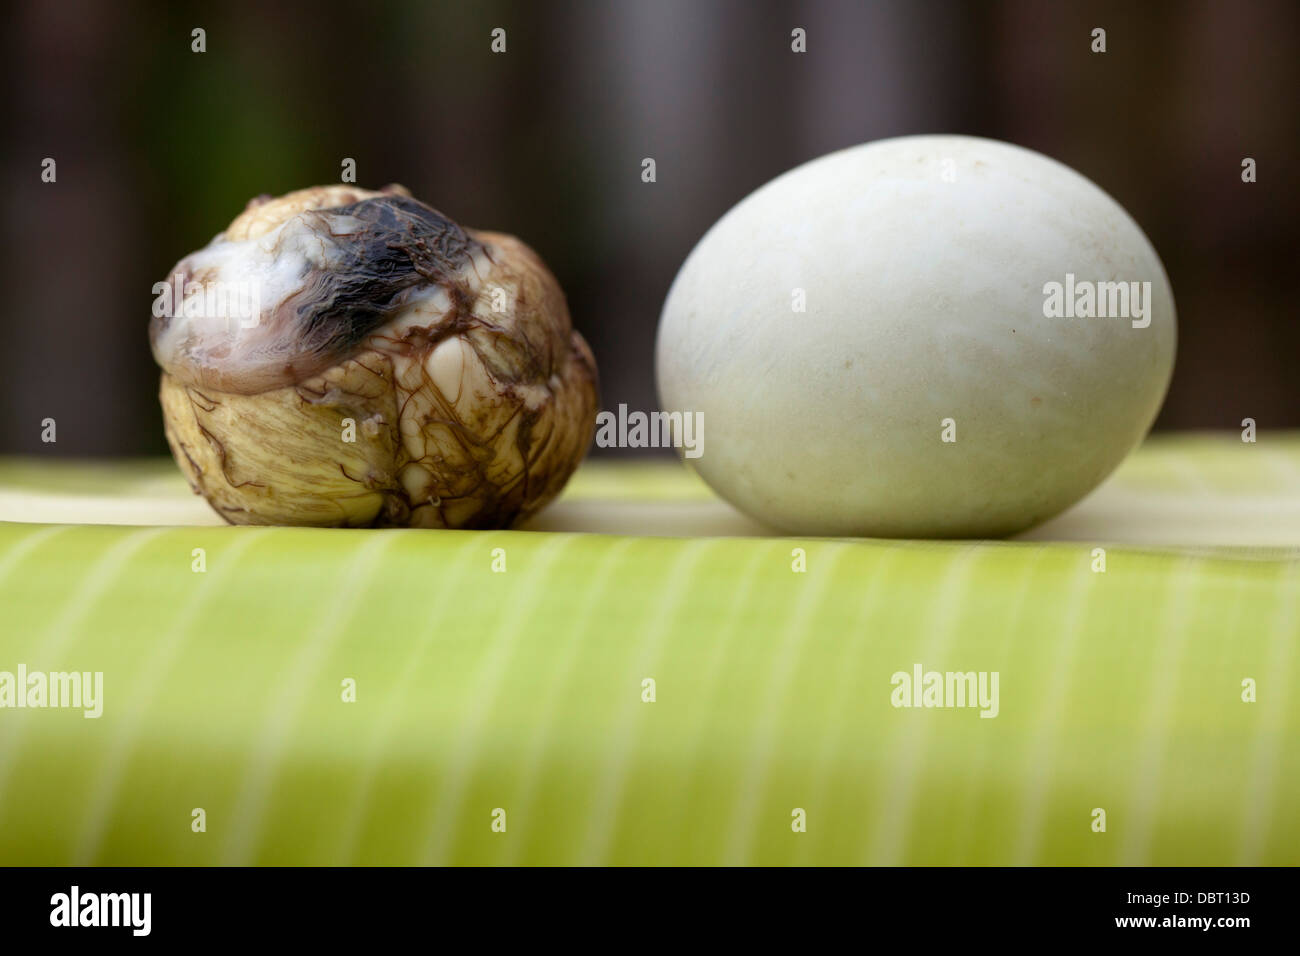 A fully shelled balut, or fertilized duck egg, pictured alongside a whole one in Oriental Mindoro, Philippines. Stock Photo